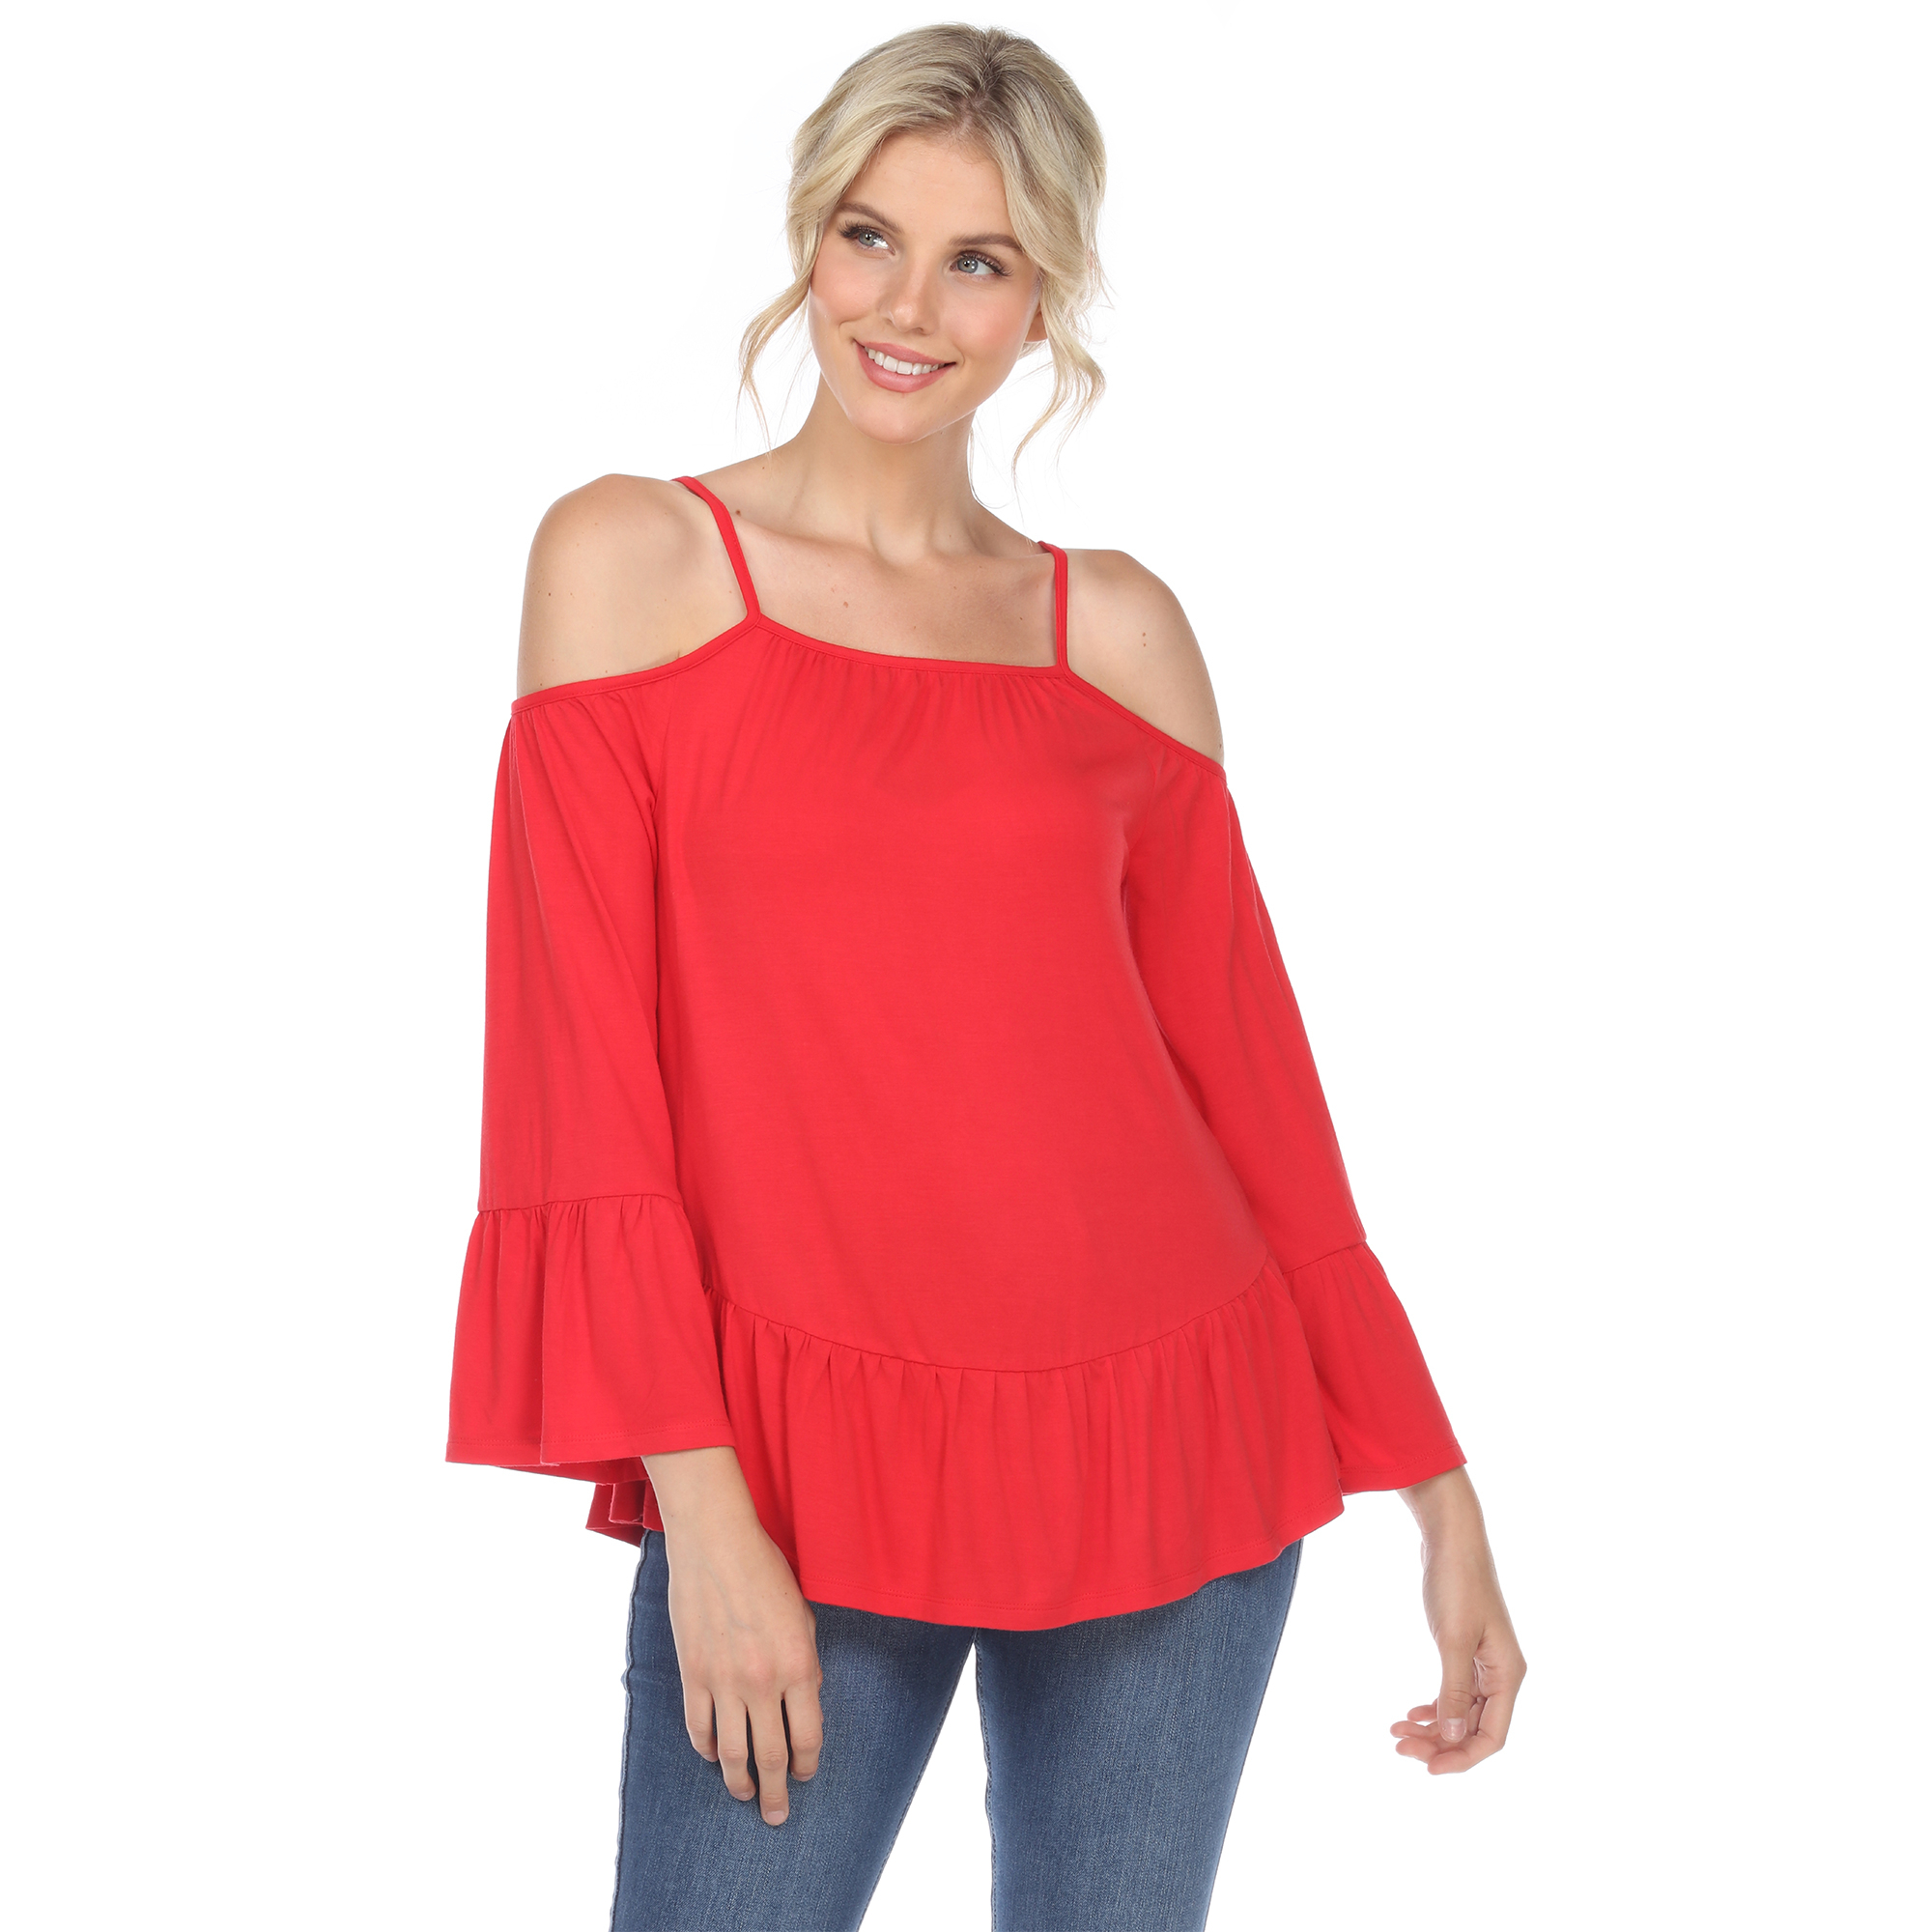 White Mark Women's Cold Shoulder Ruffle Sleeve Top - Red, X-Large